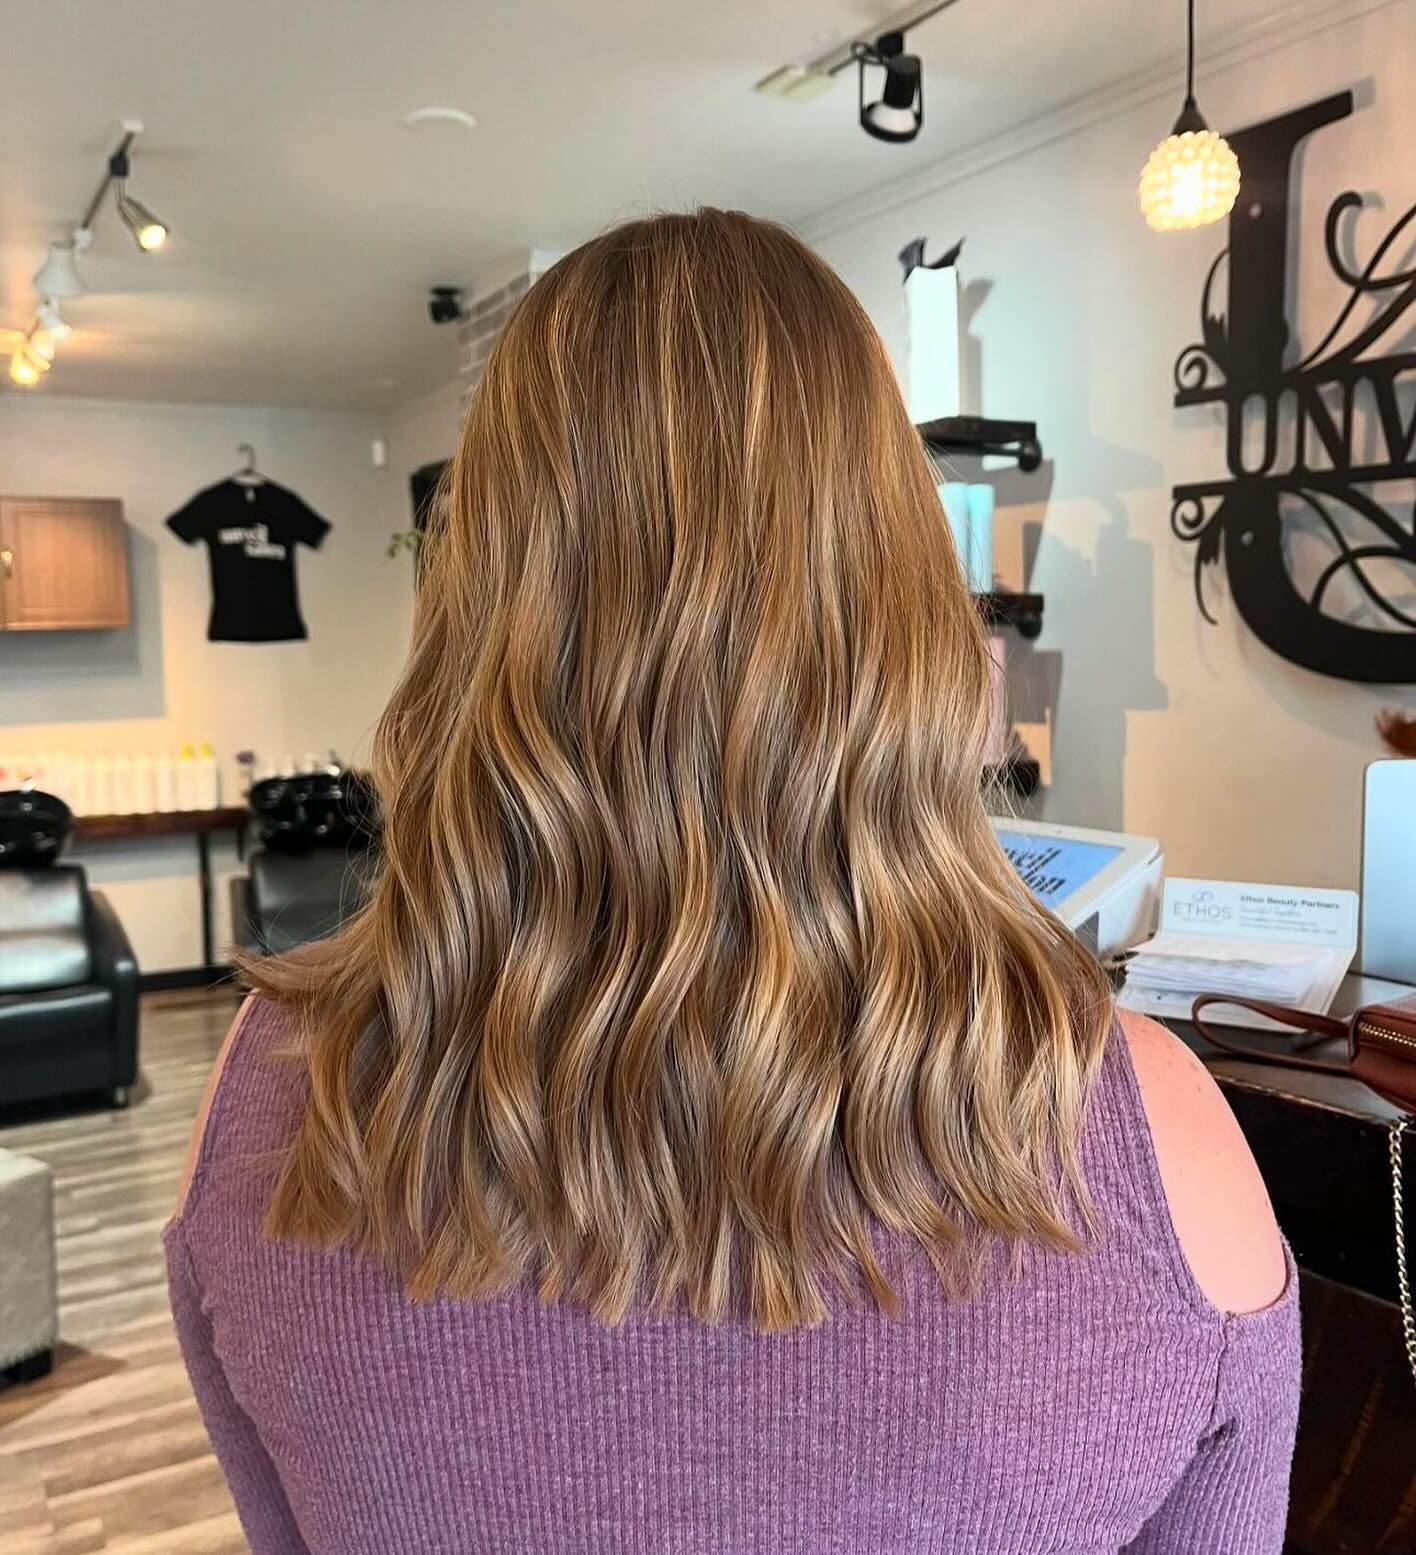 Sun-kissed balayage by Janell! 🌞